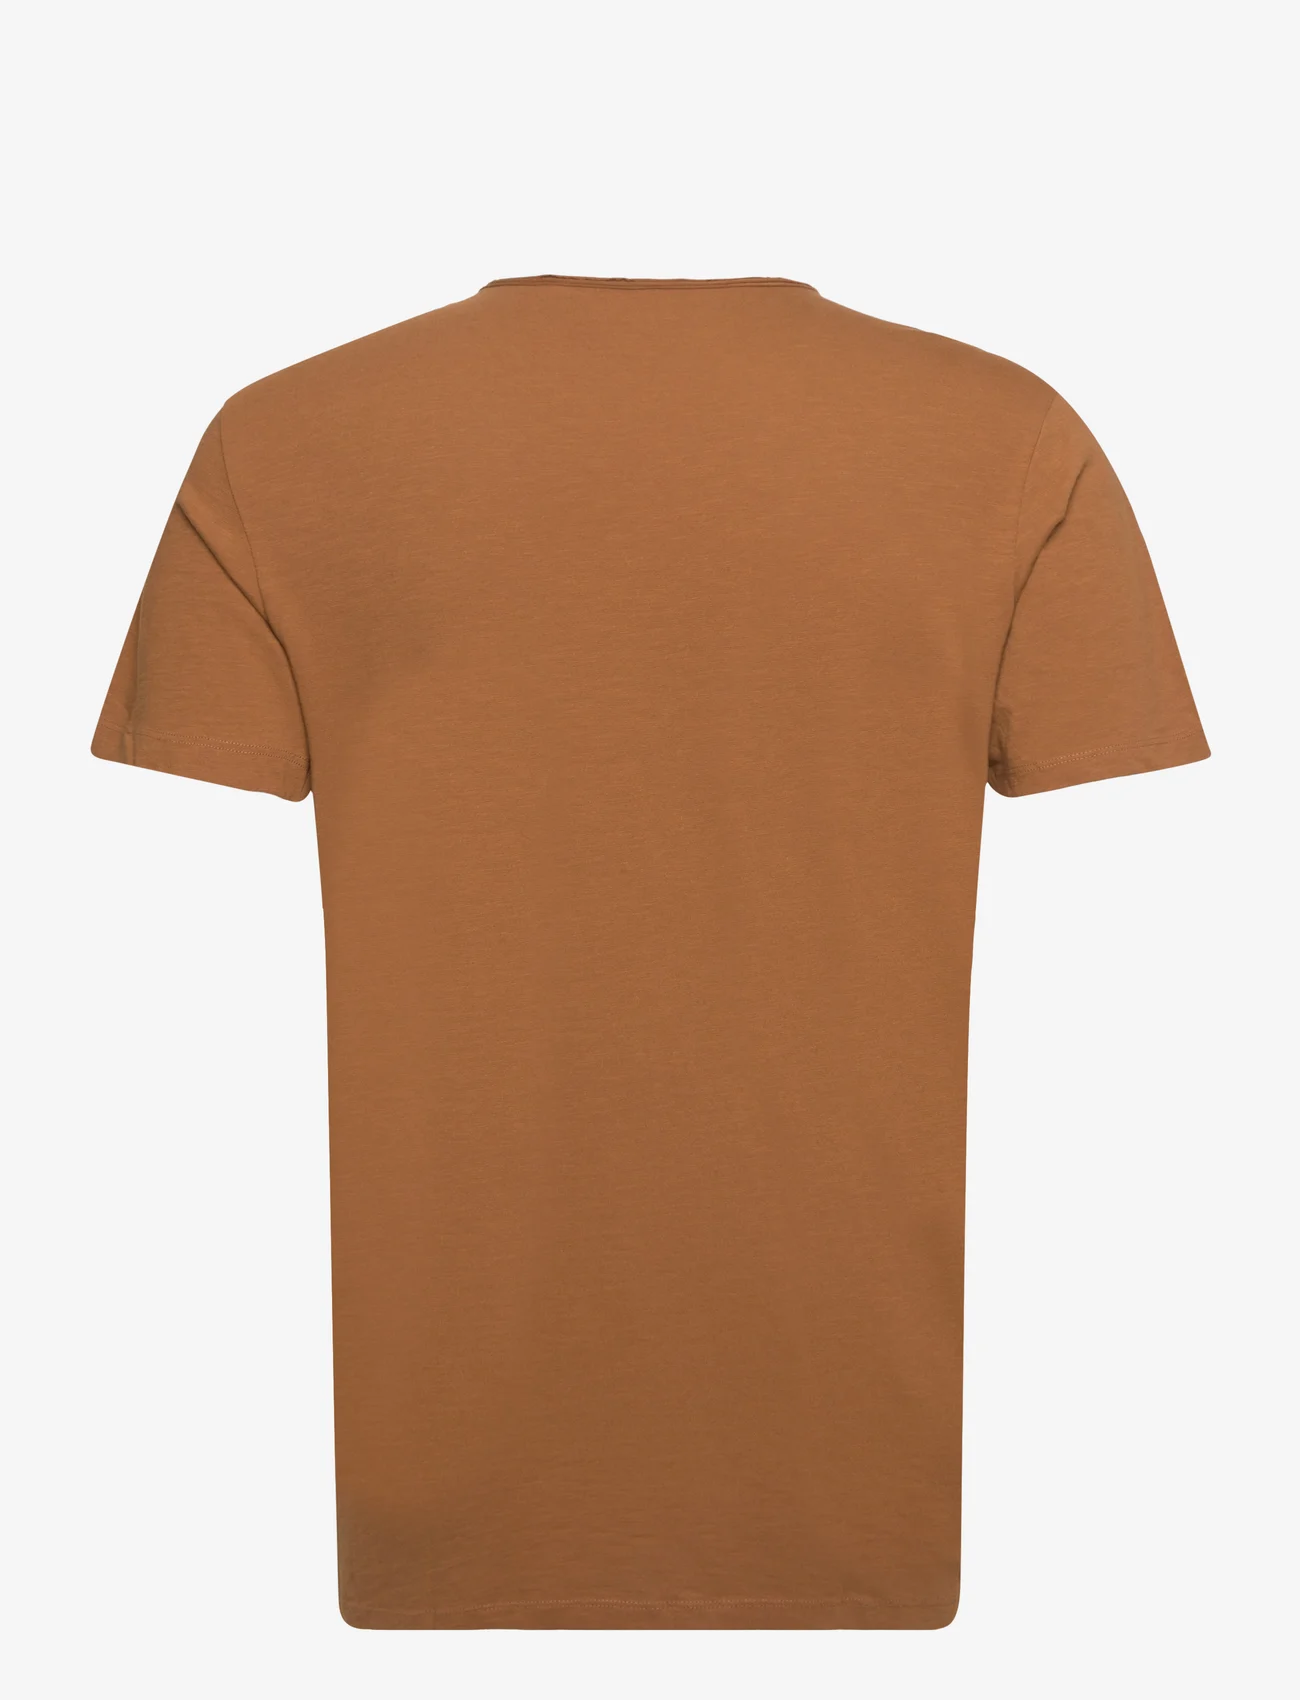 Jack & Jones - JJEBASHER TEE O-NECK SS NOOS - lowest prices - rubber - 1